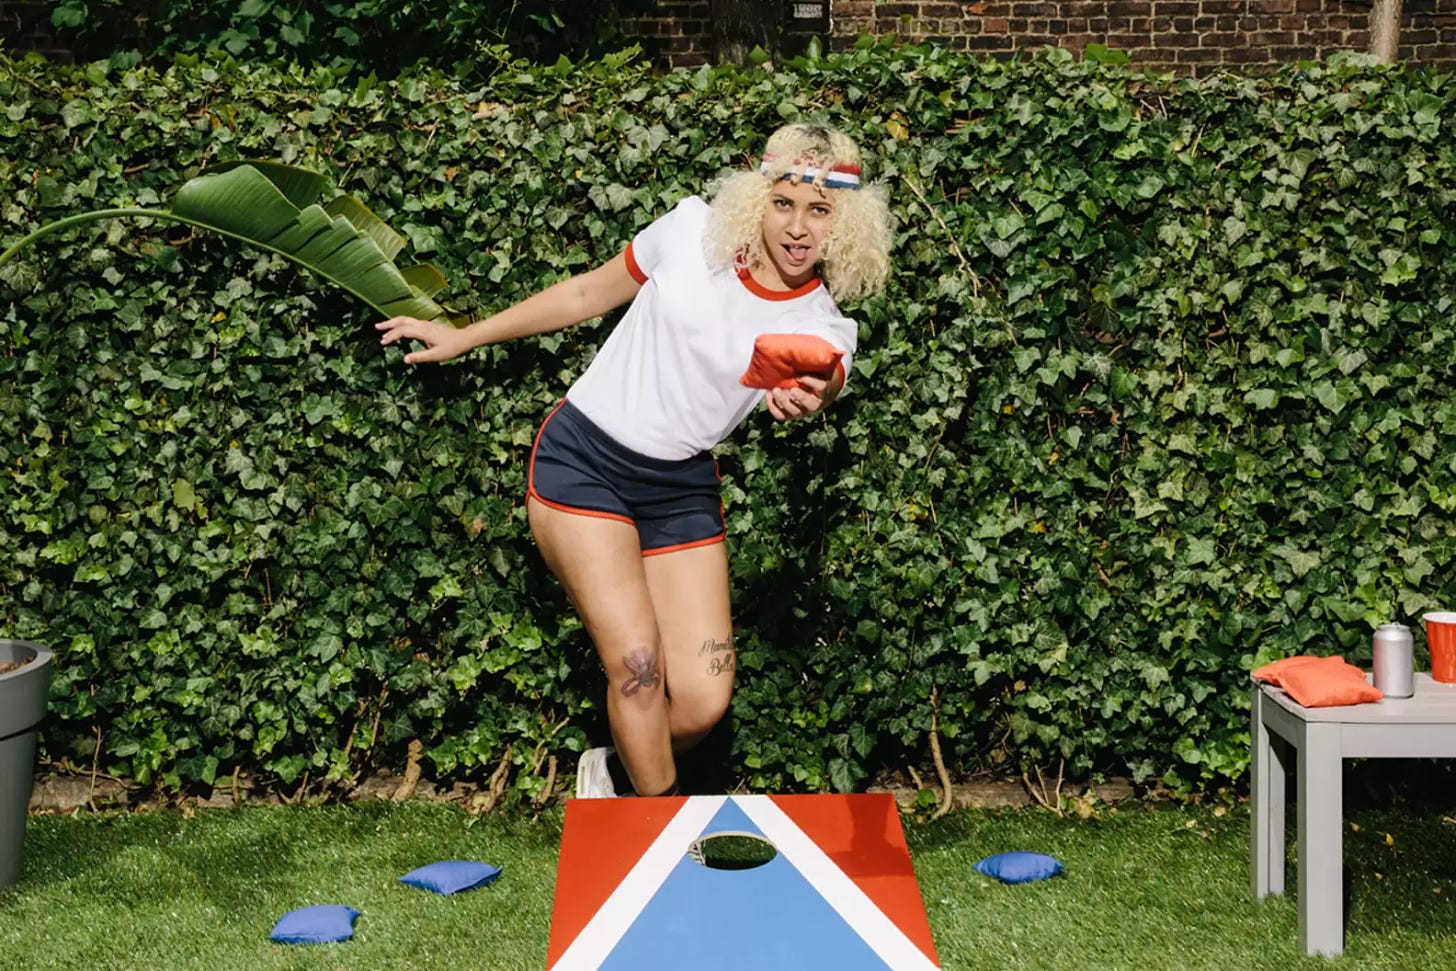 https://www.thrillist.com/lifestyle/nation/how-to-take-your-cornhole-game-to-the-next-level